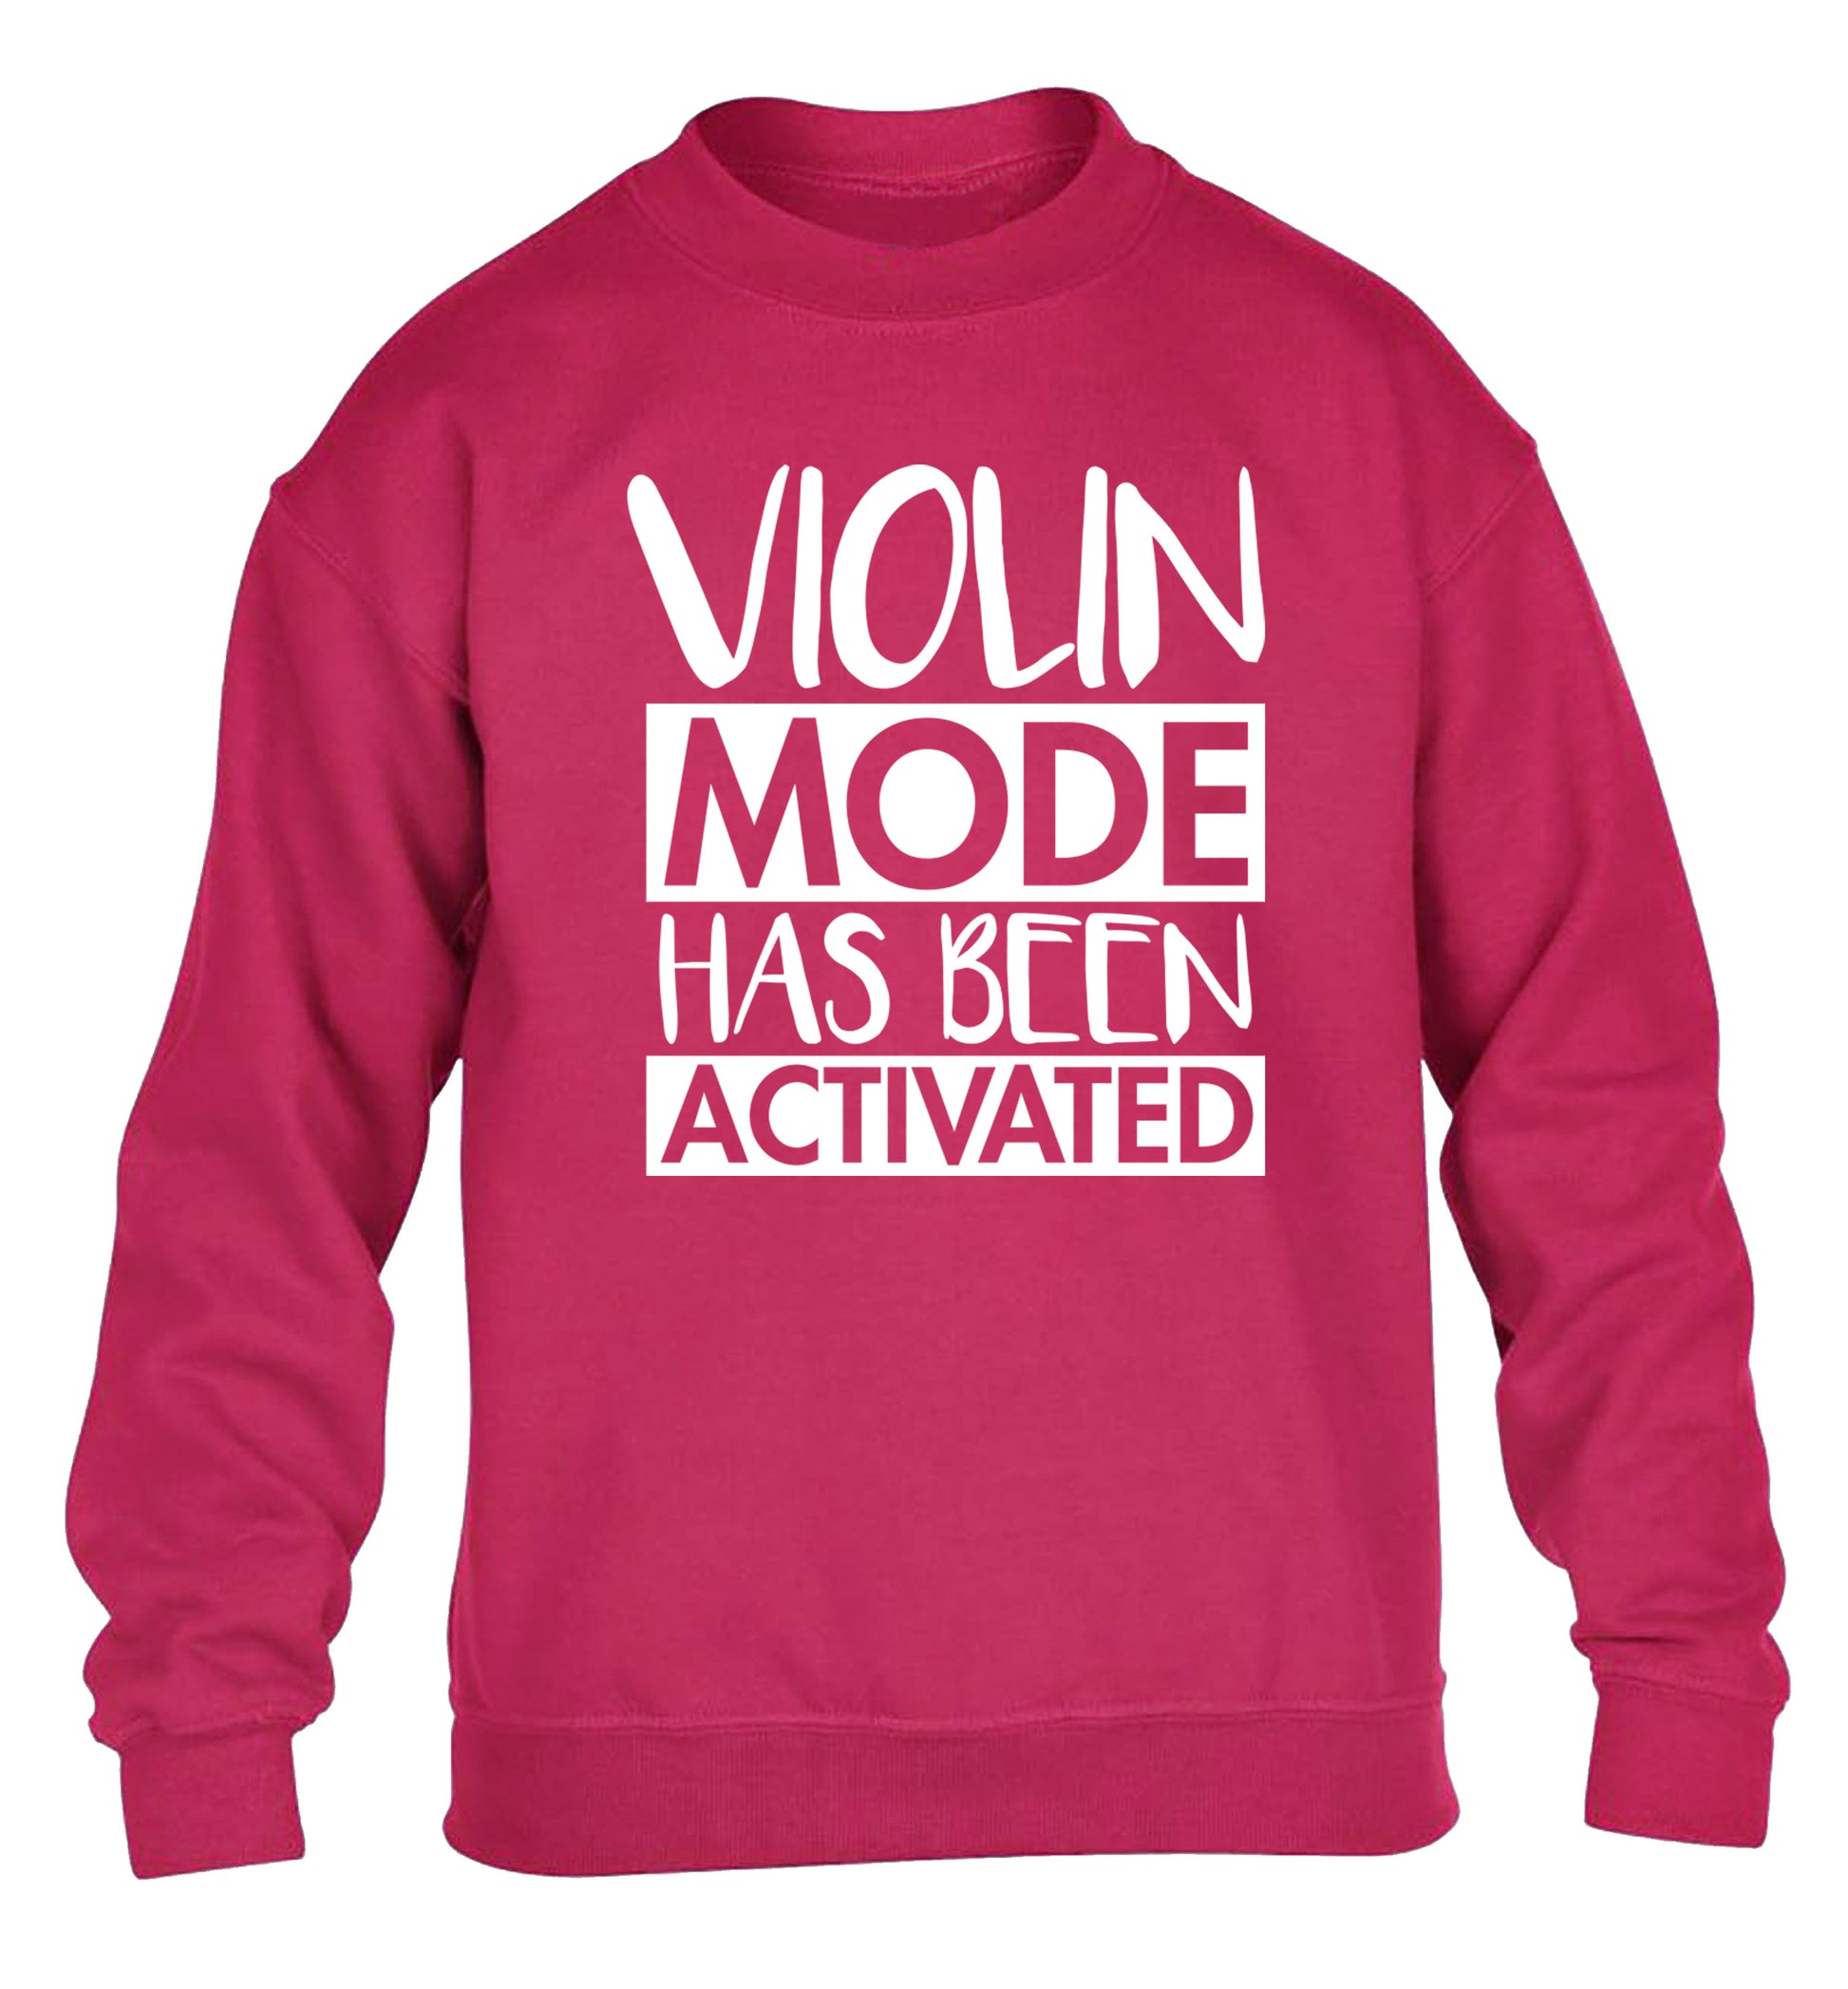 Violin Mode Activated children's pink sweater 12-13 Years